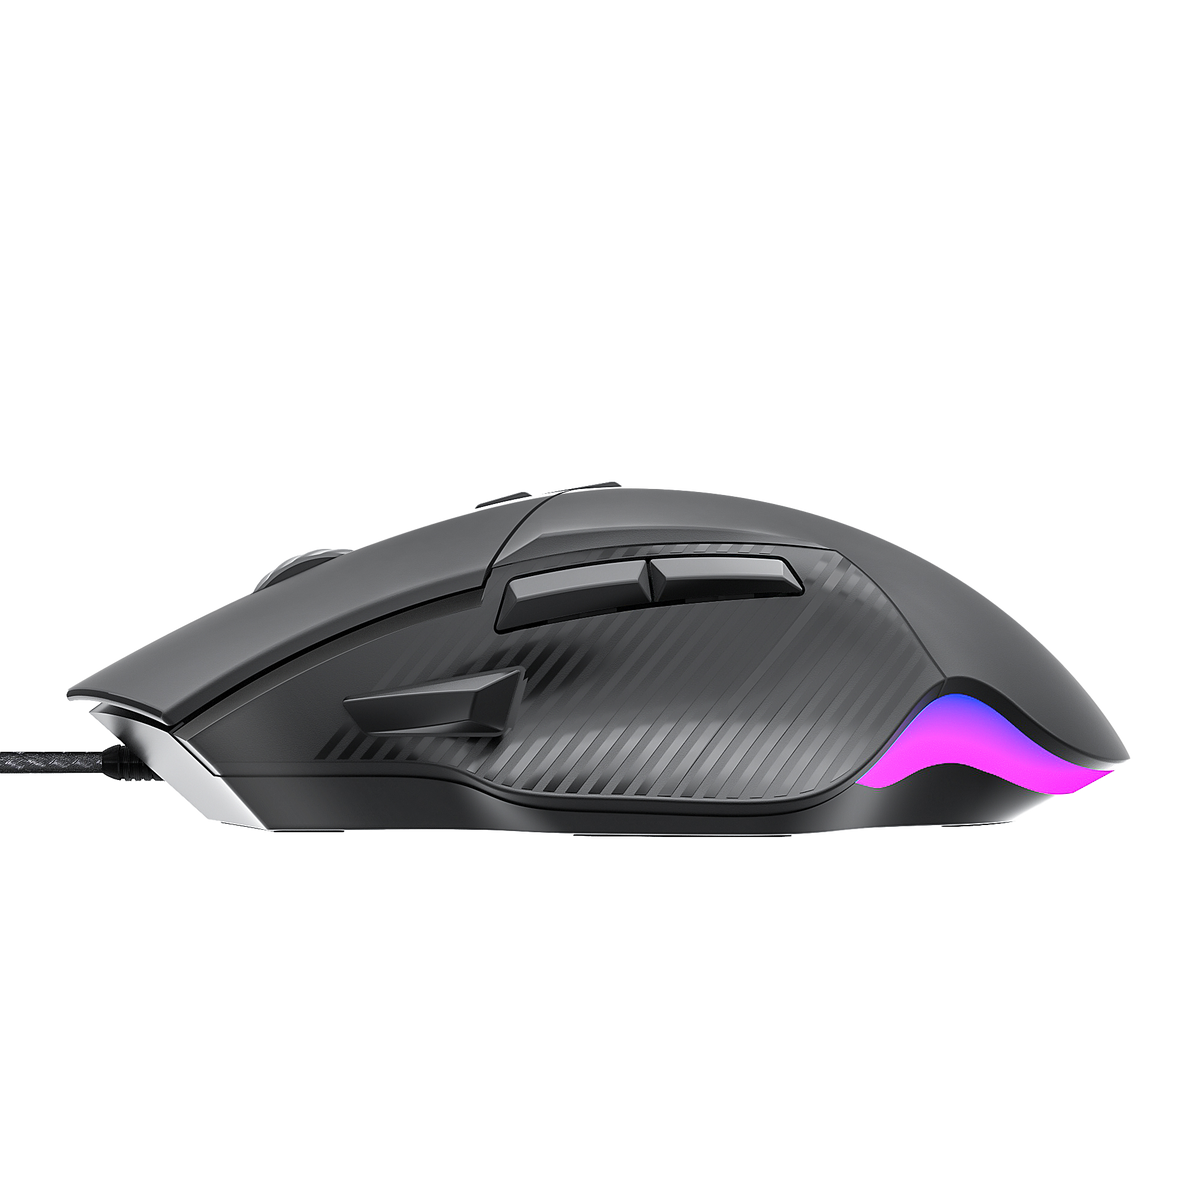 Recurve 300 RGB Gaming Mouse